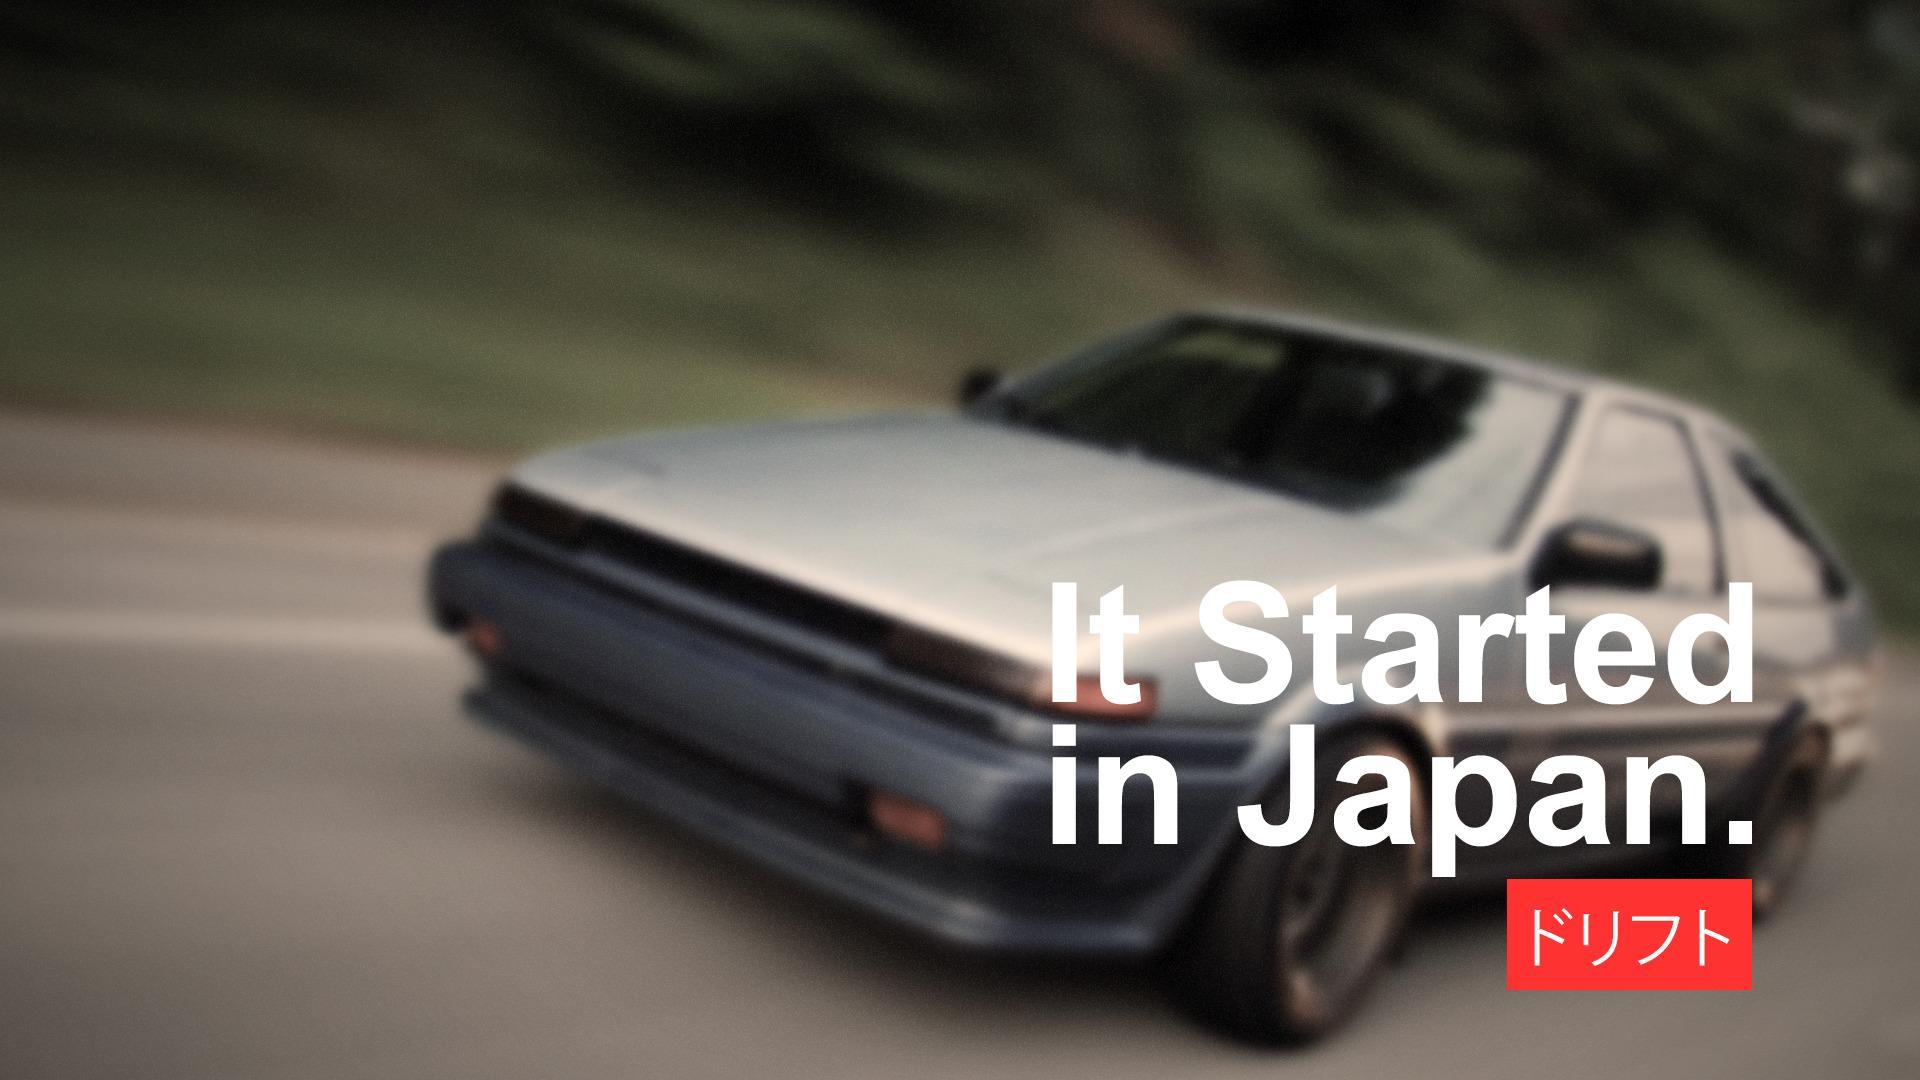 HD wallpaper, 1920X1080 Car Japan Drift Drifting Racing Vehicle Japanese Cars Import Tuning Modified Toyota Ae86 Toyota Ae86 Initial D It Started In Japan Wallpaper Jpg 450 Kb